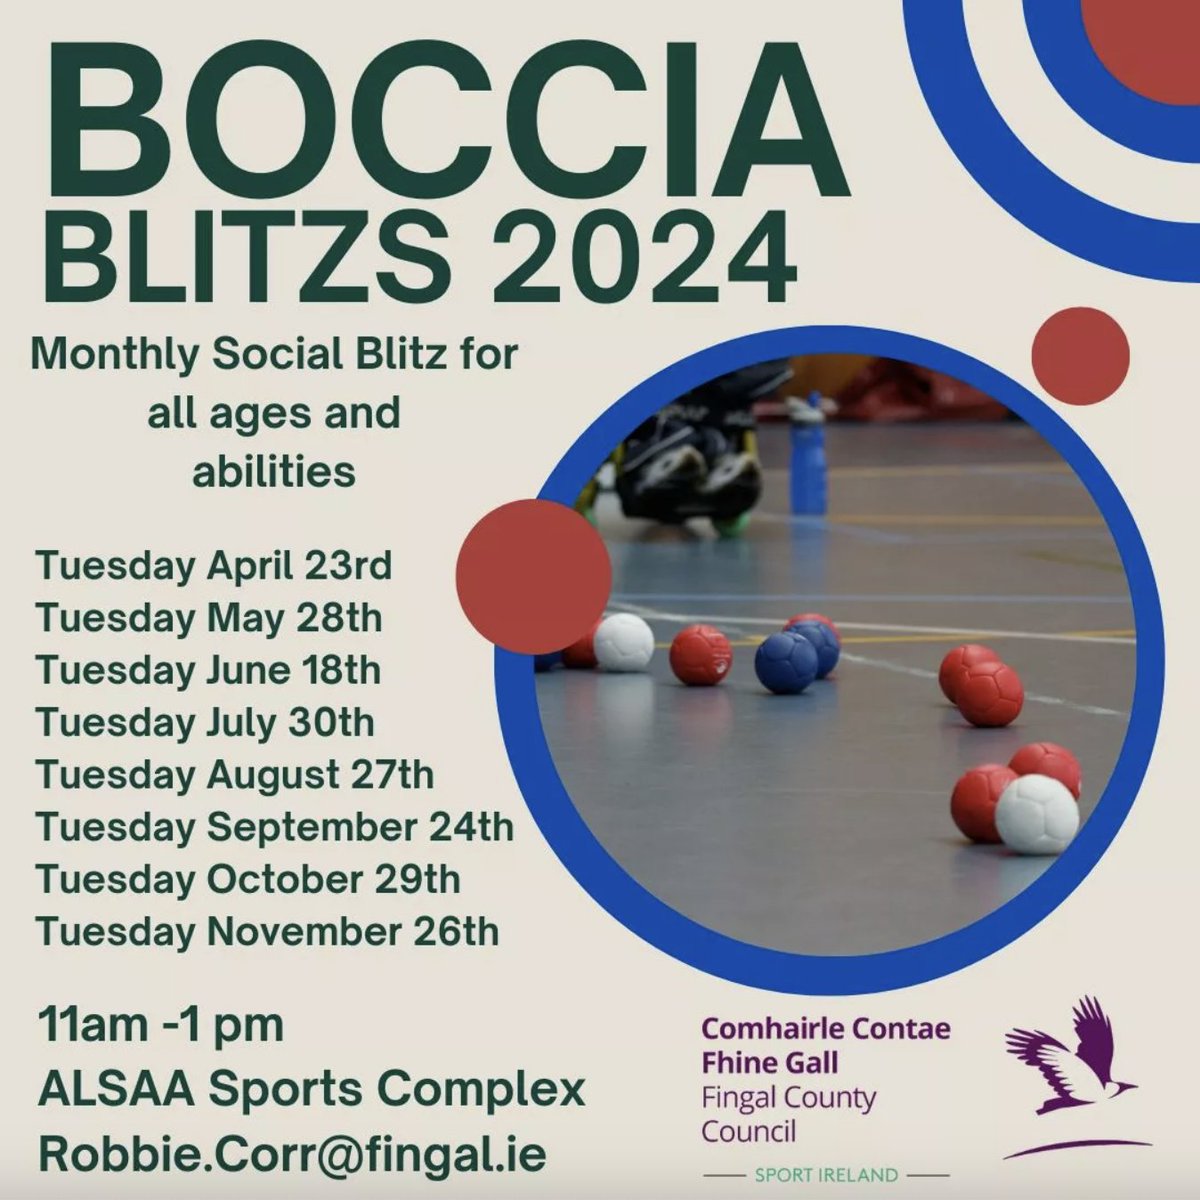 Boccia Blitz 2024! 🔴🔵 Monthly Social Blitz for all ages and abilities! 🕐 Time: 11am - 1pm, 📍 Location: Alsaa Sports Centre 🗓️ Duration: 11 Blitz's - see poster for dates 📧 Email: Robbie.Corr@fingal.ie @fingalcoco